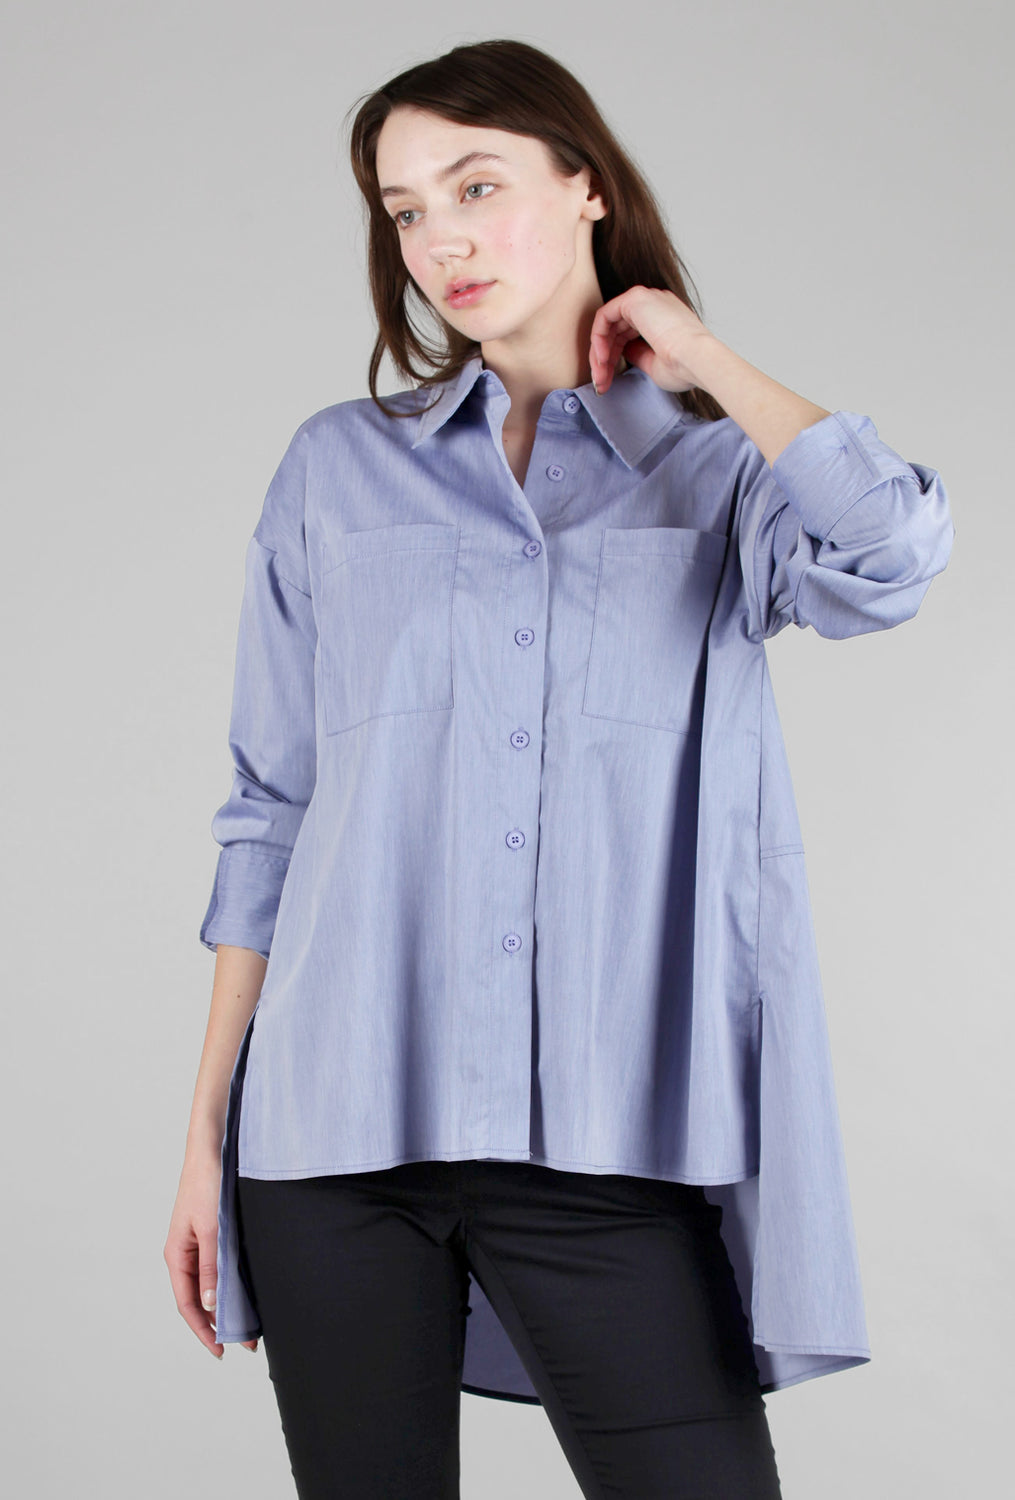 High-Low Oversized Tunic, Blue